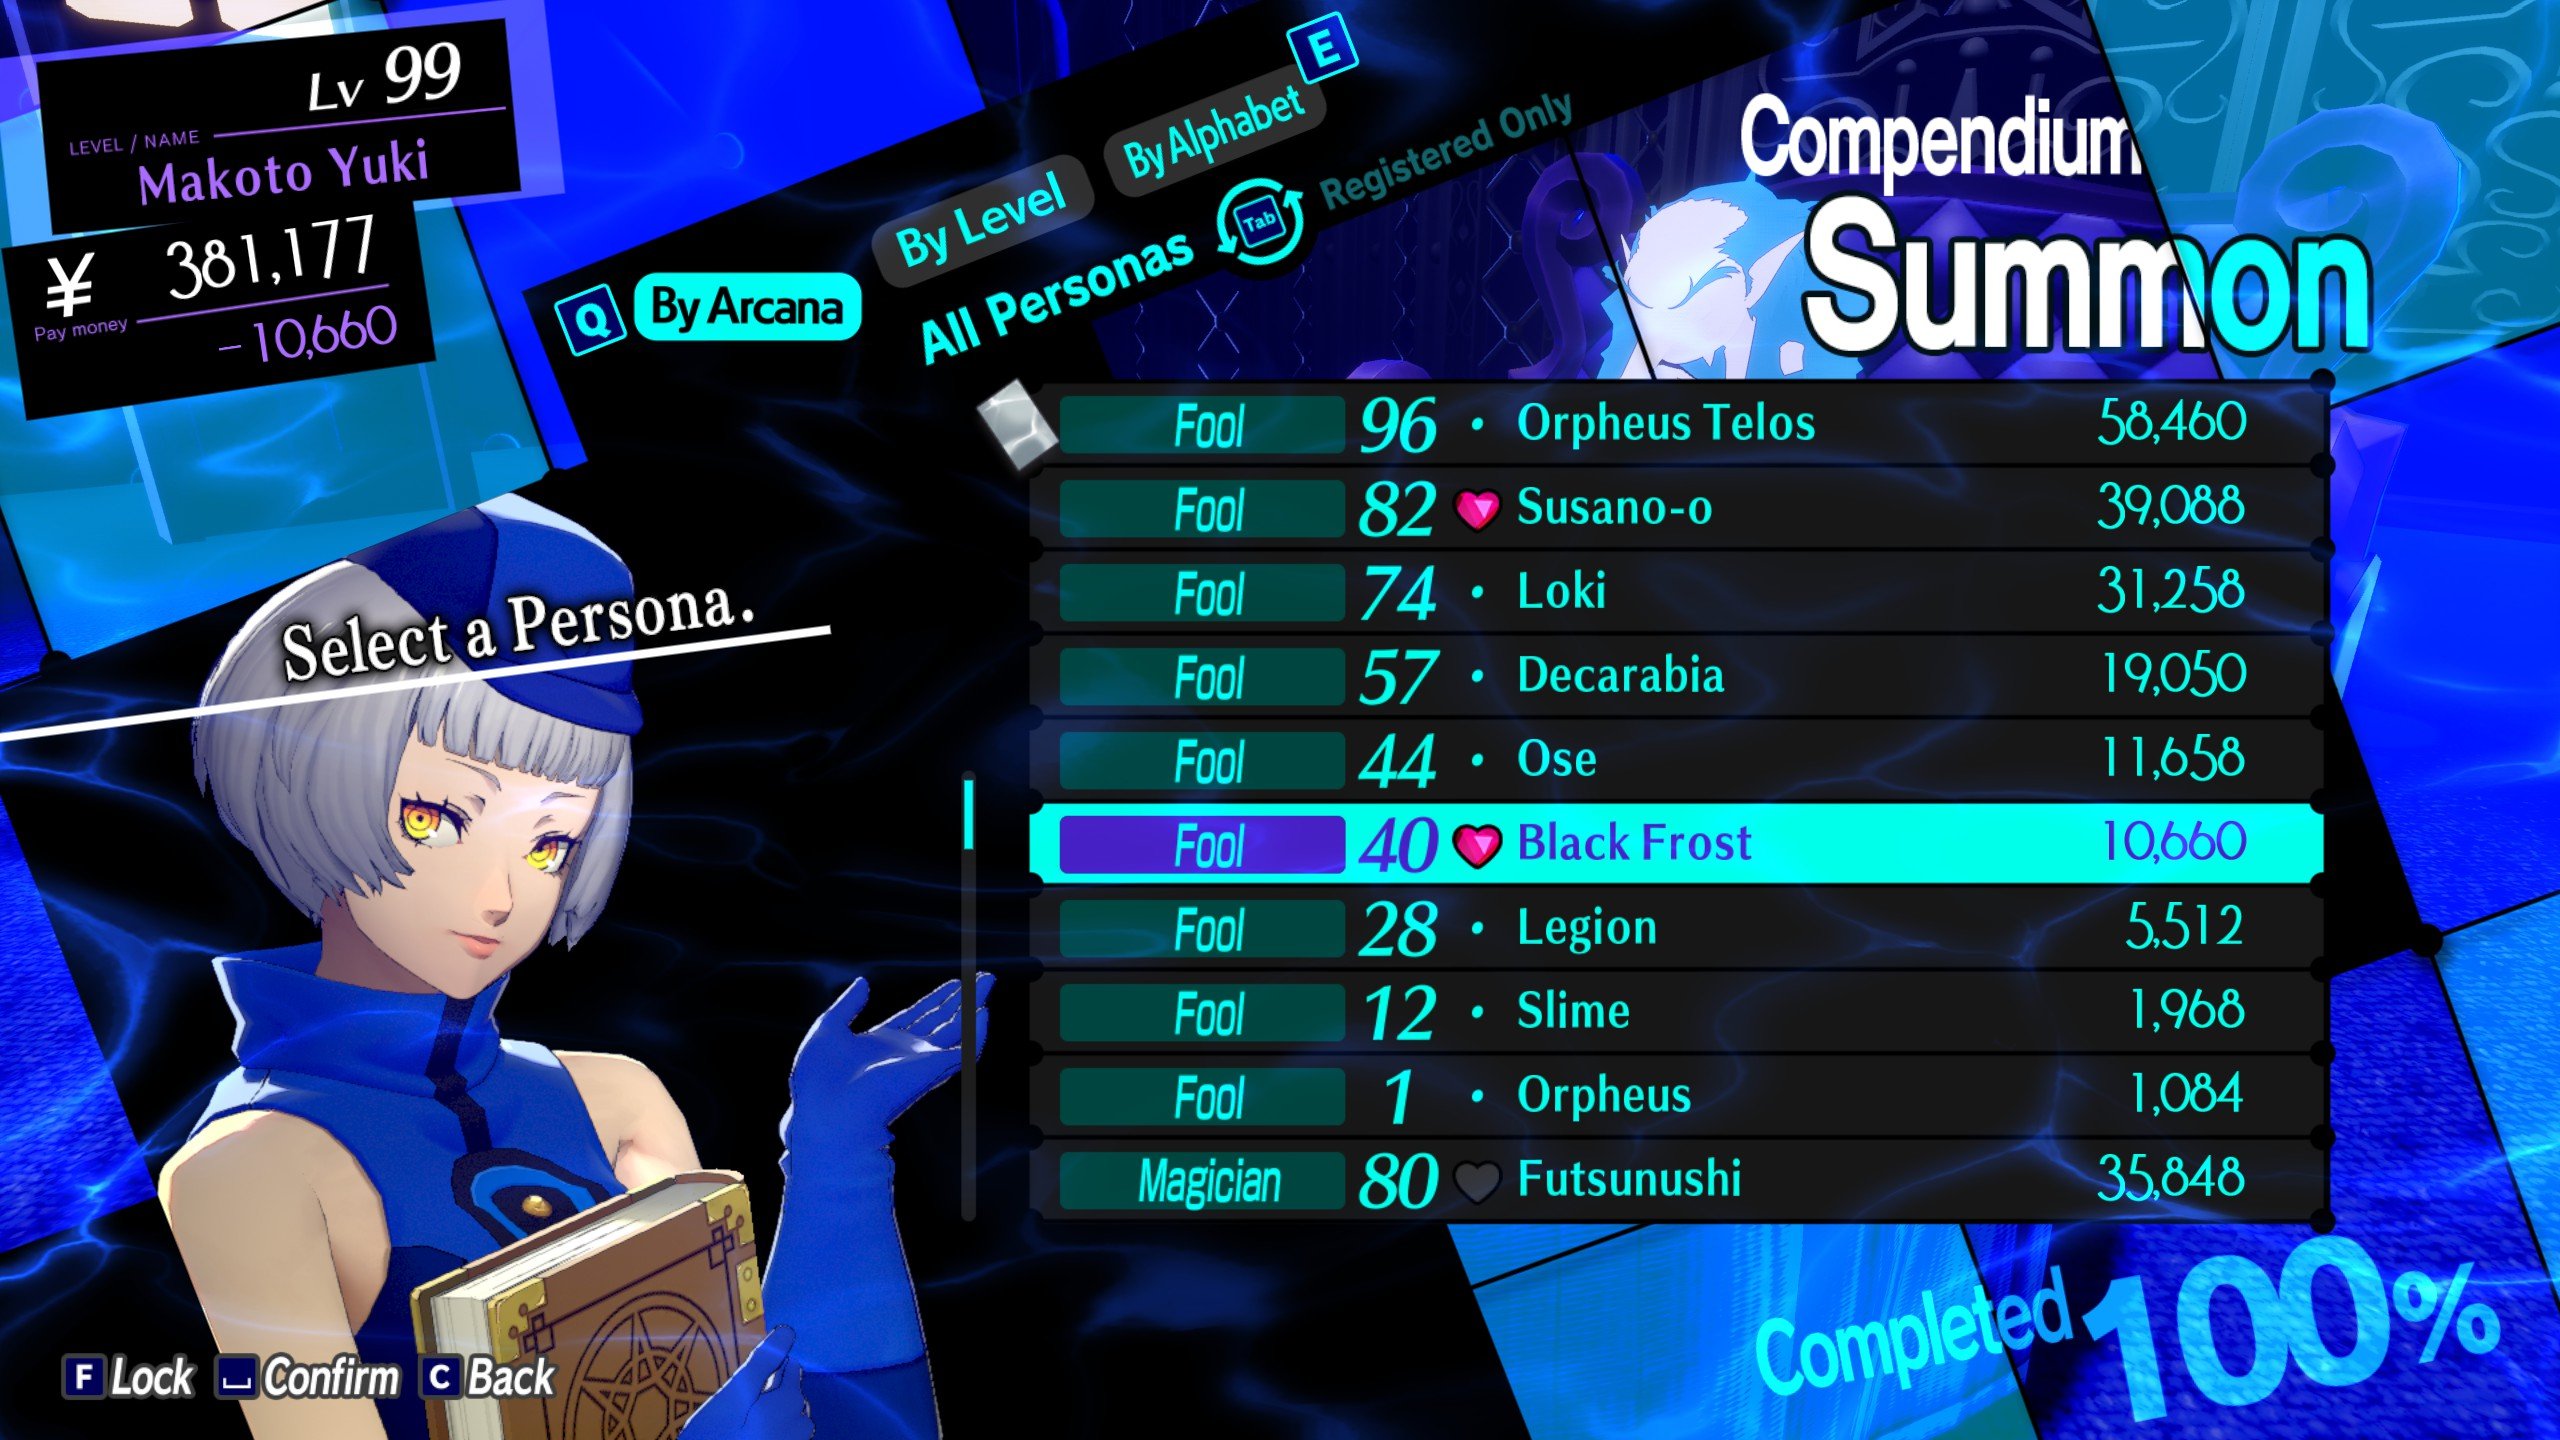 An image showcasing Heart Items next to a Persona in Persona 3 Reload.